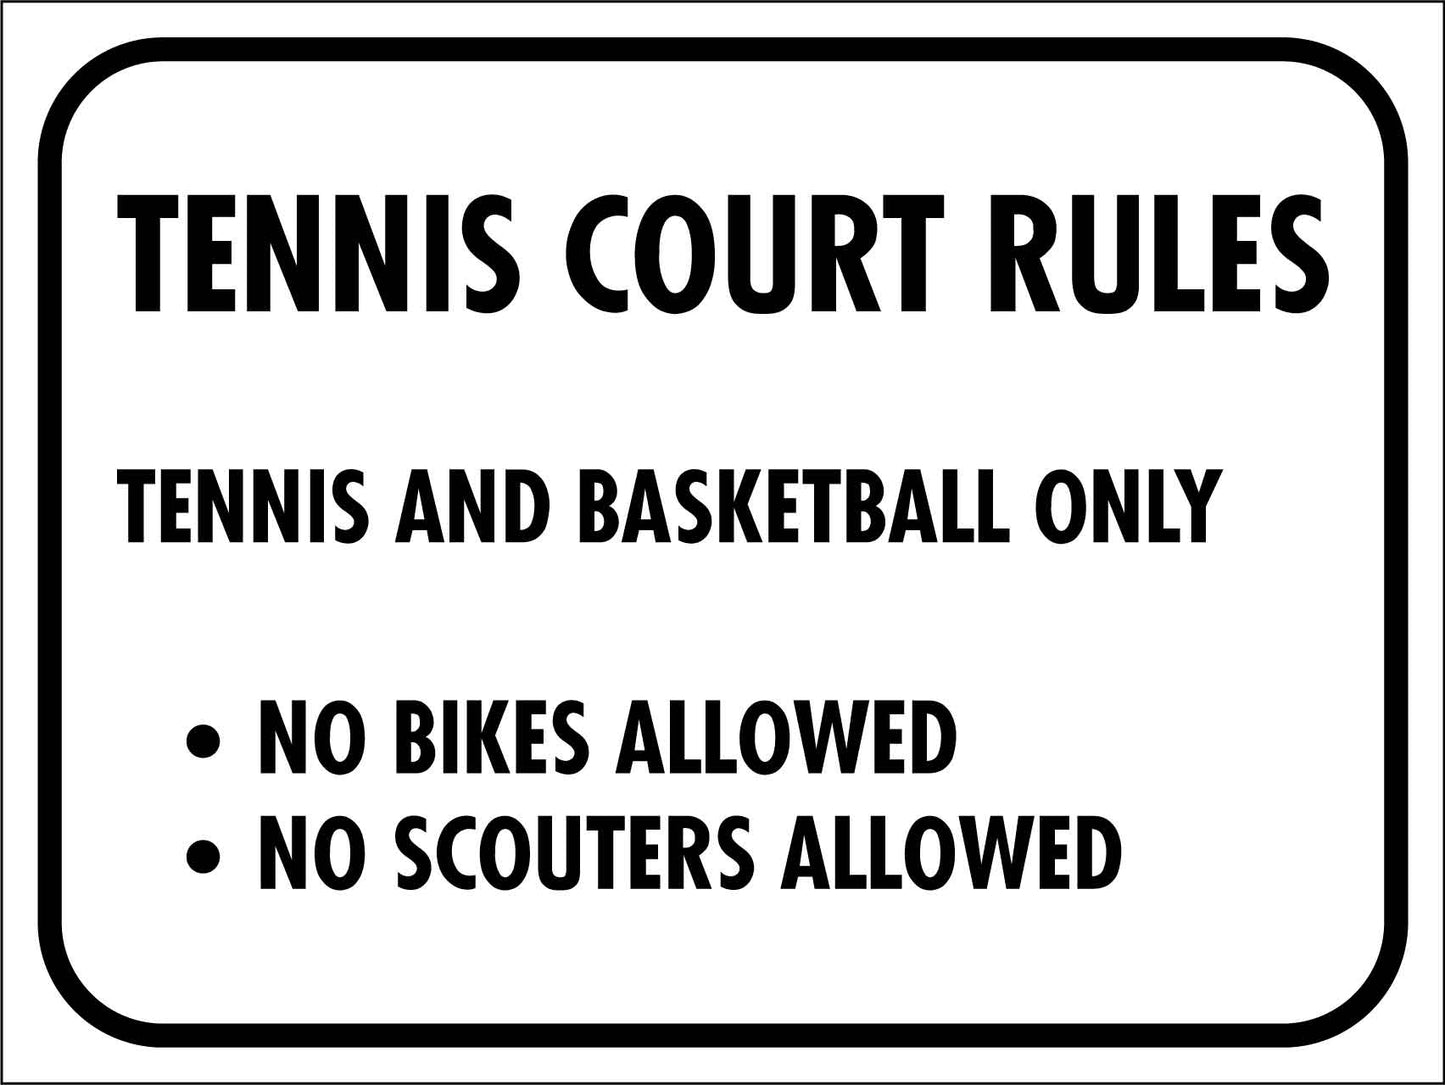 Tennis Court Rules 1 Sign